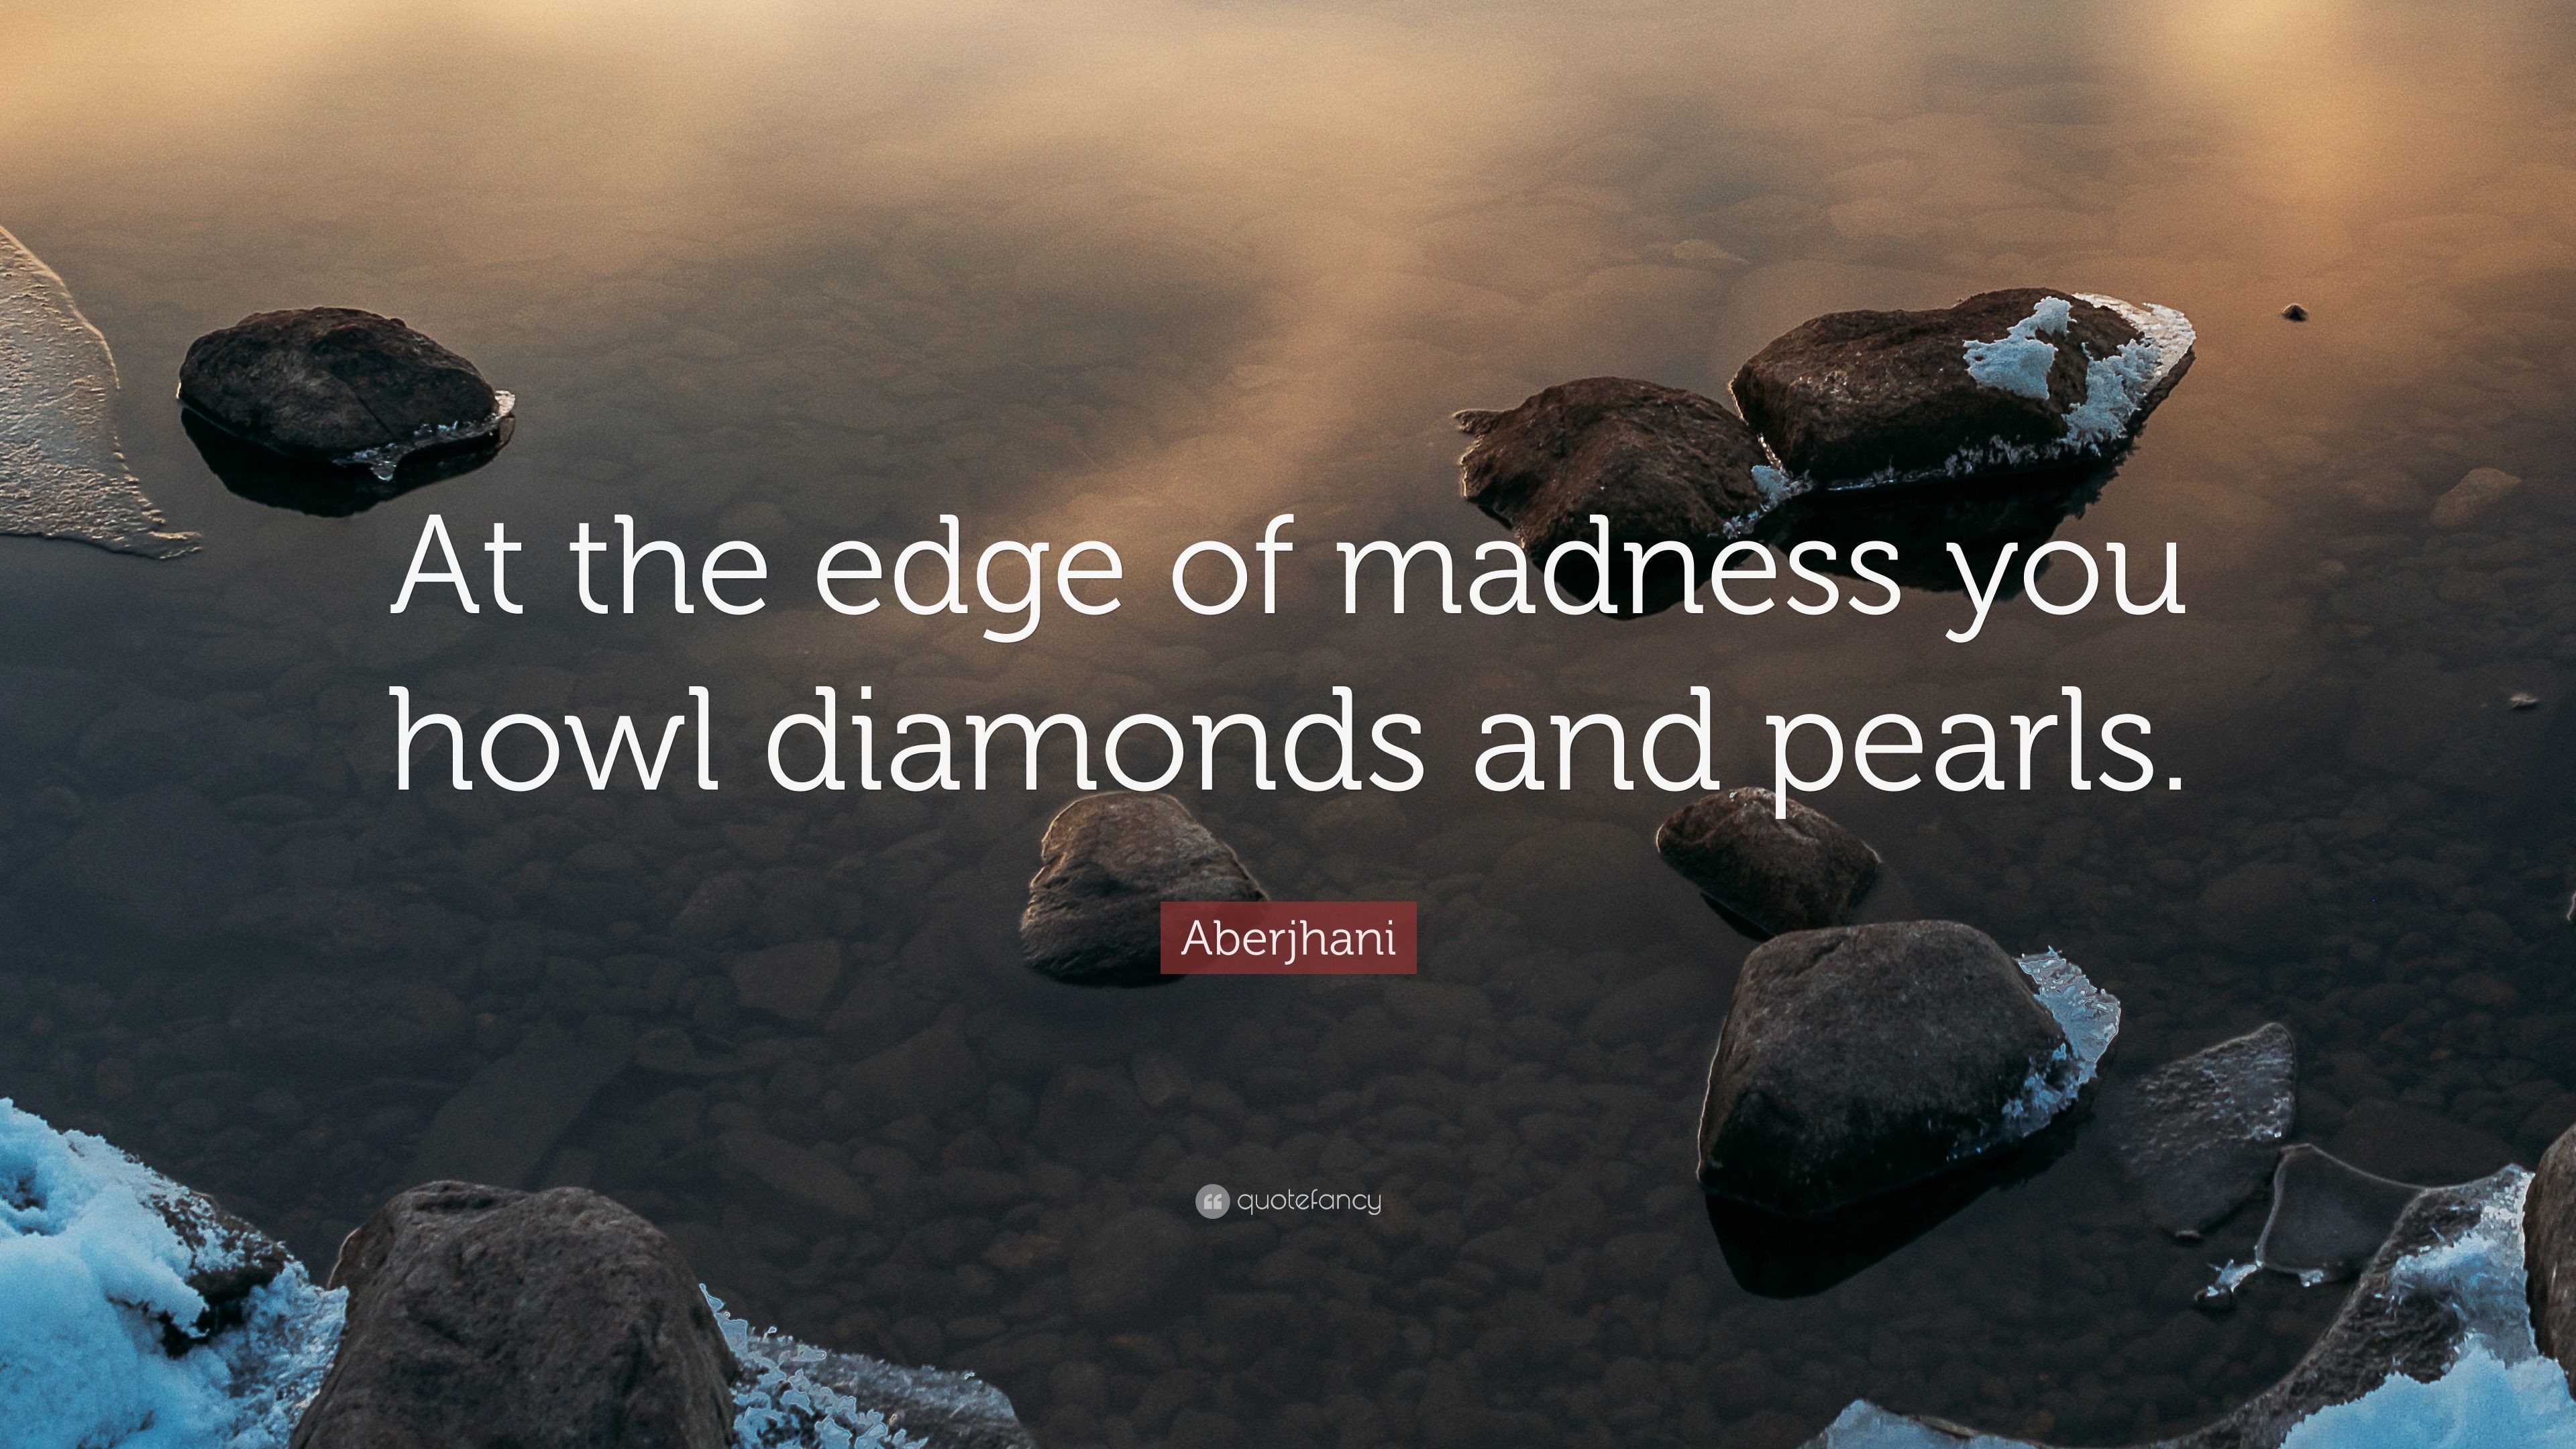 3840x2160 Aberjhani Quote: “At the edge of madness you howl diamonds and pearls.”